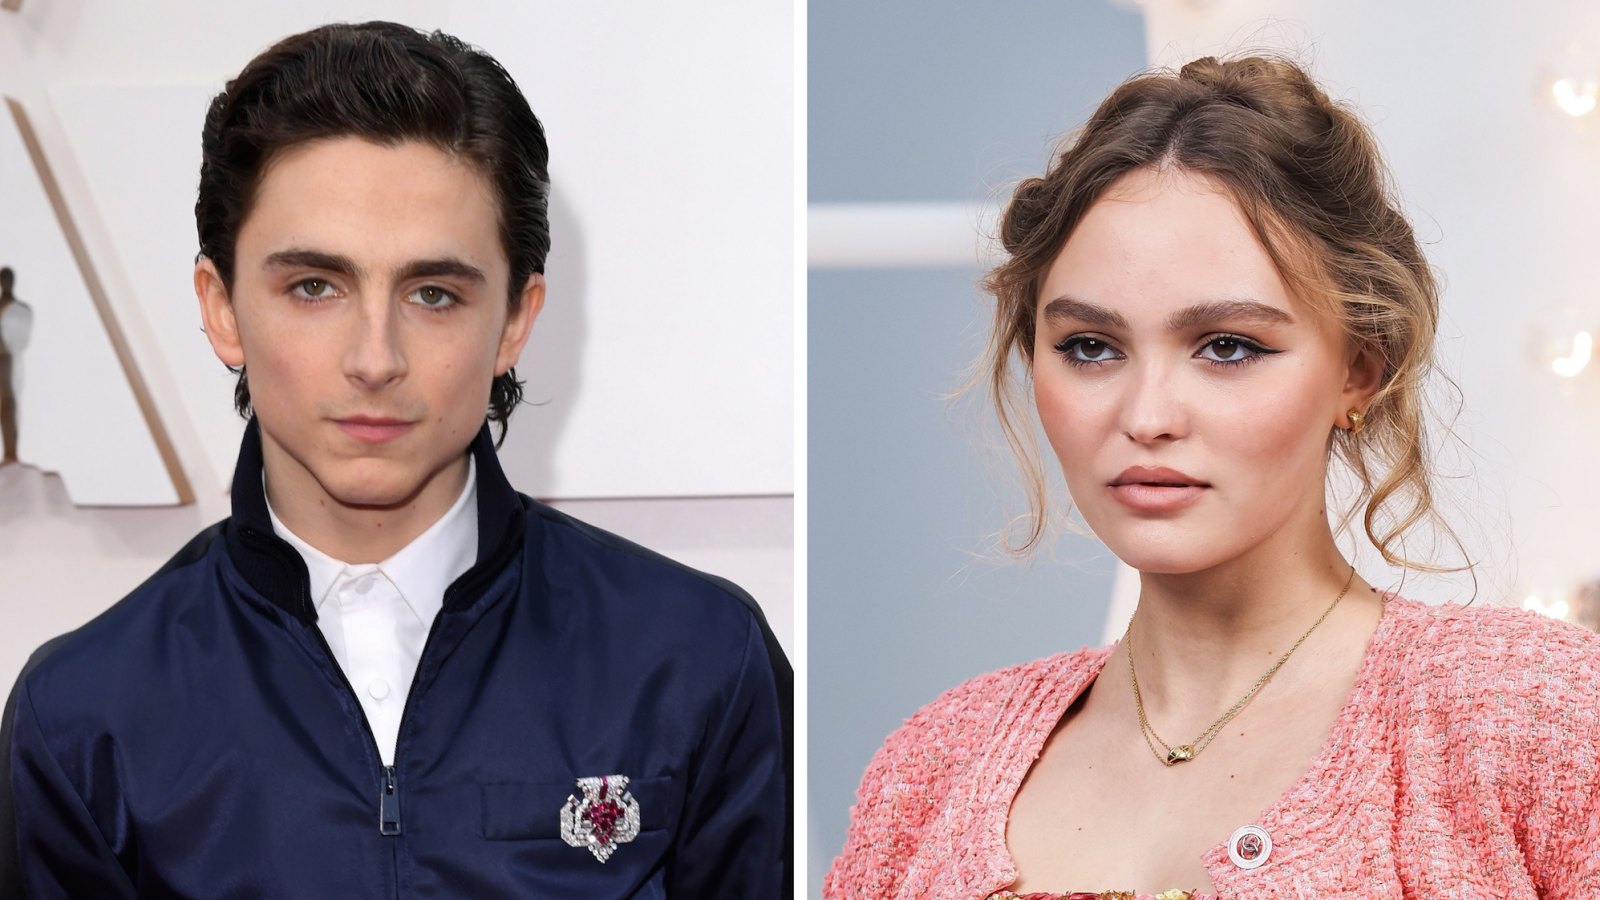 Timothee Chalamet Was Embarrassed Over Lily-Rose Depp Yacht Kissing Pics